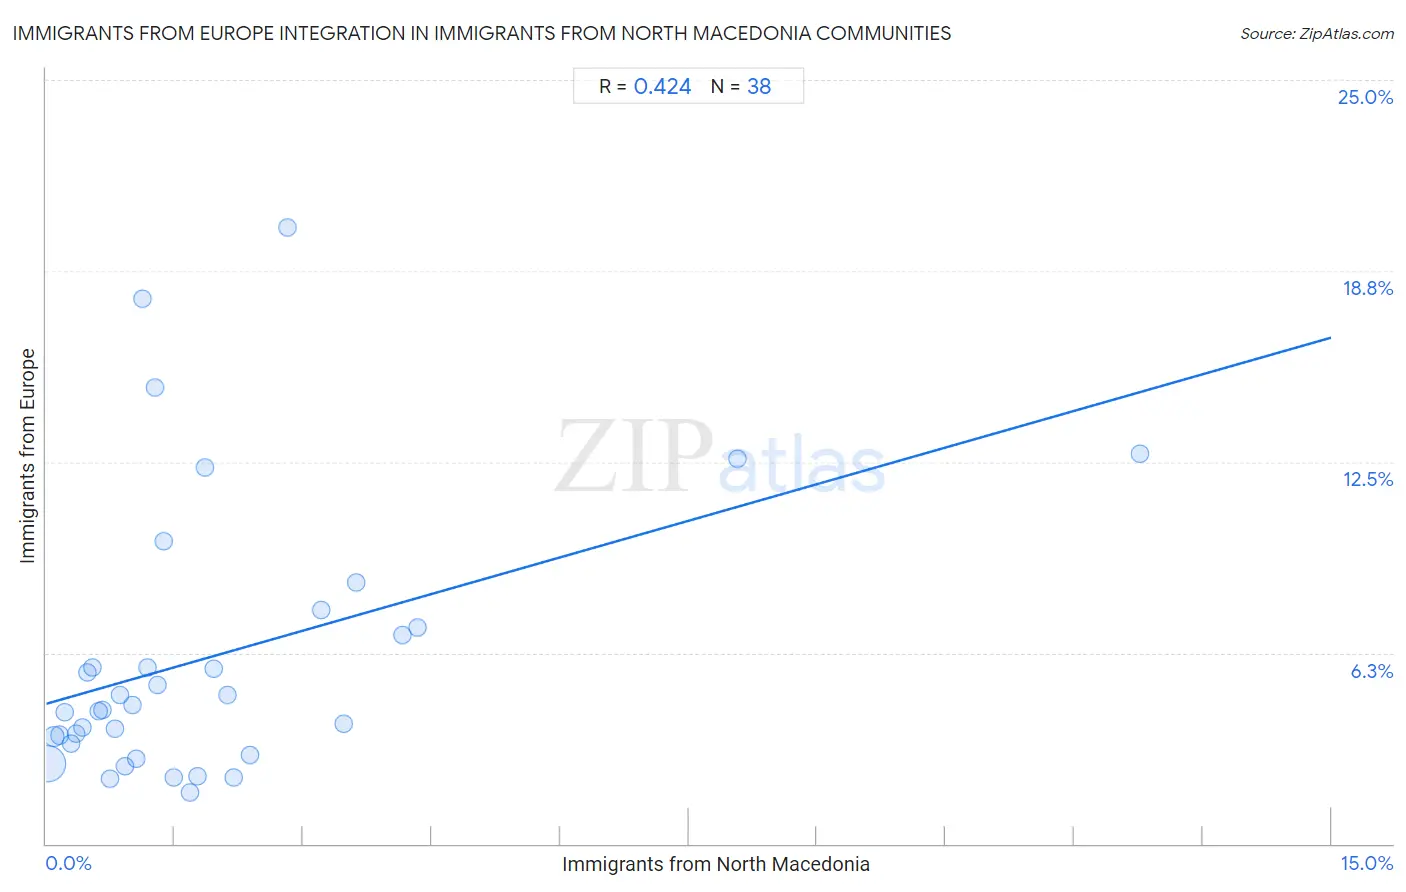 Immigrants from North Macedonia Integration in Immigrants from Europe Communities